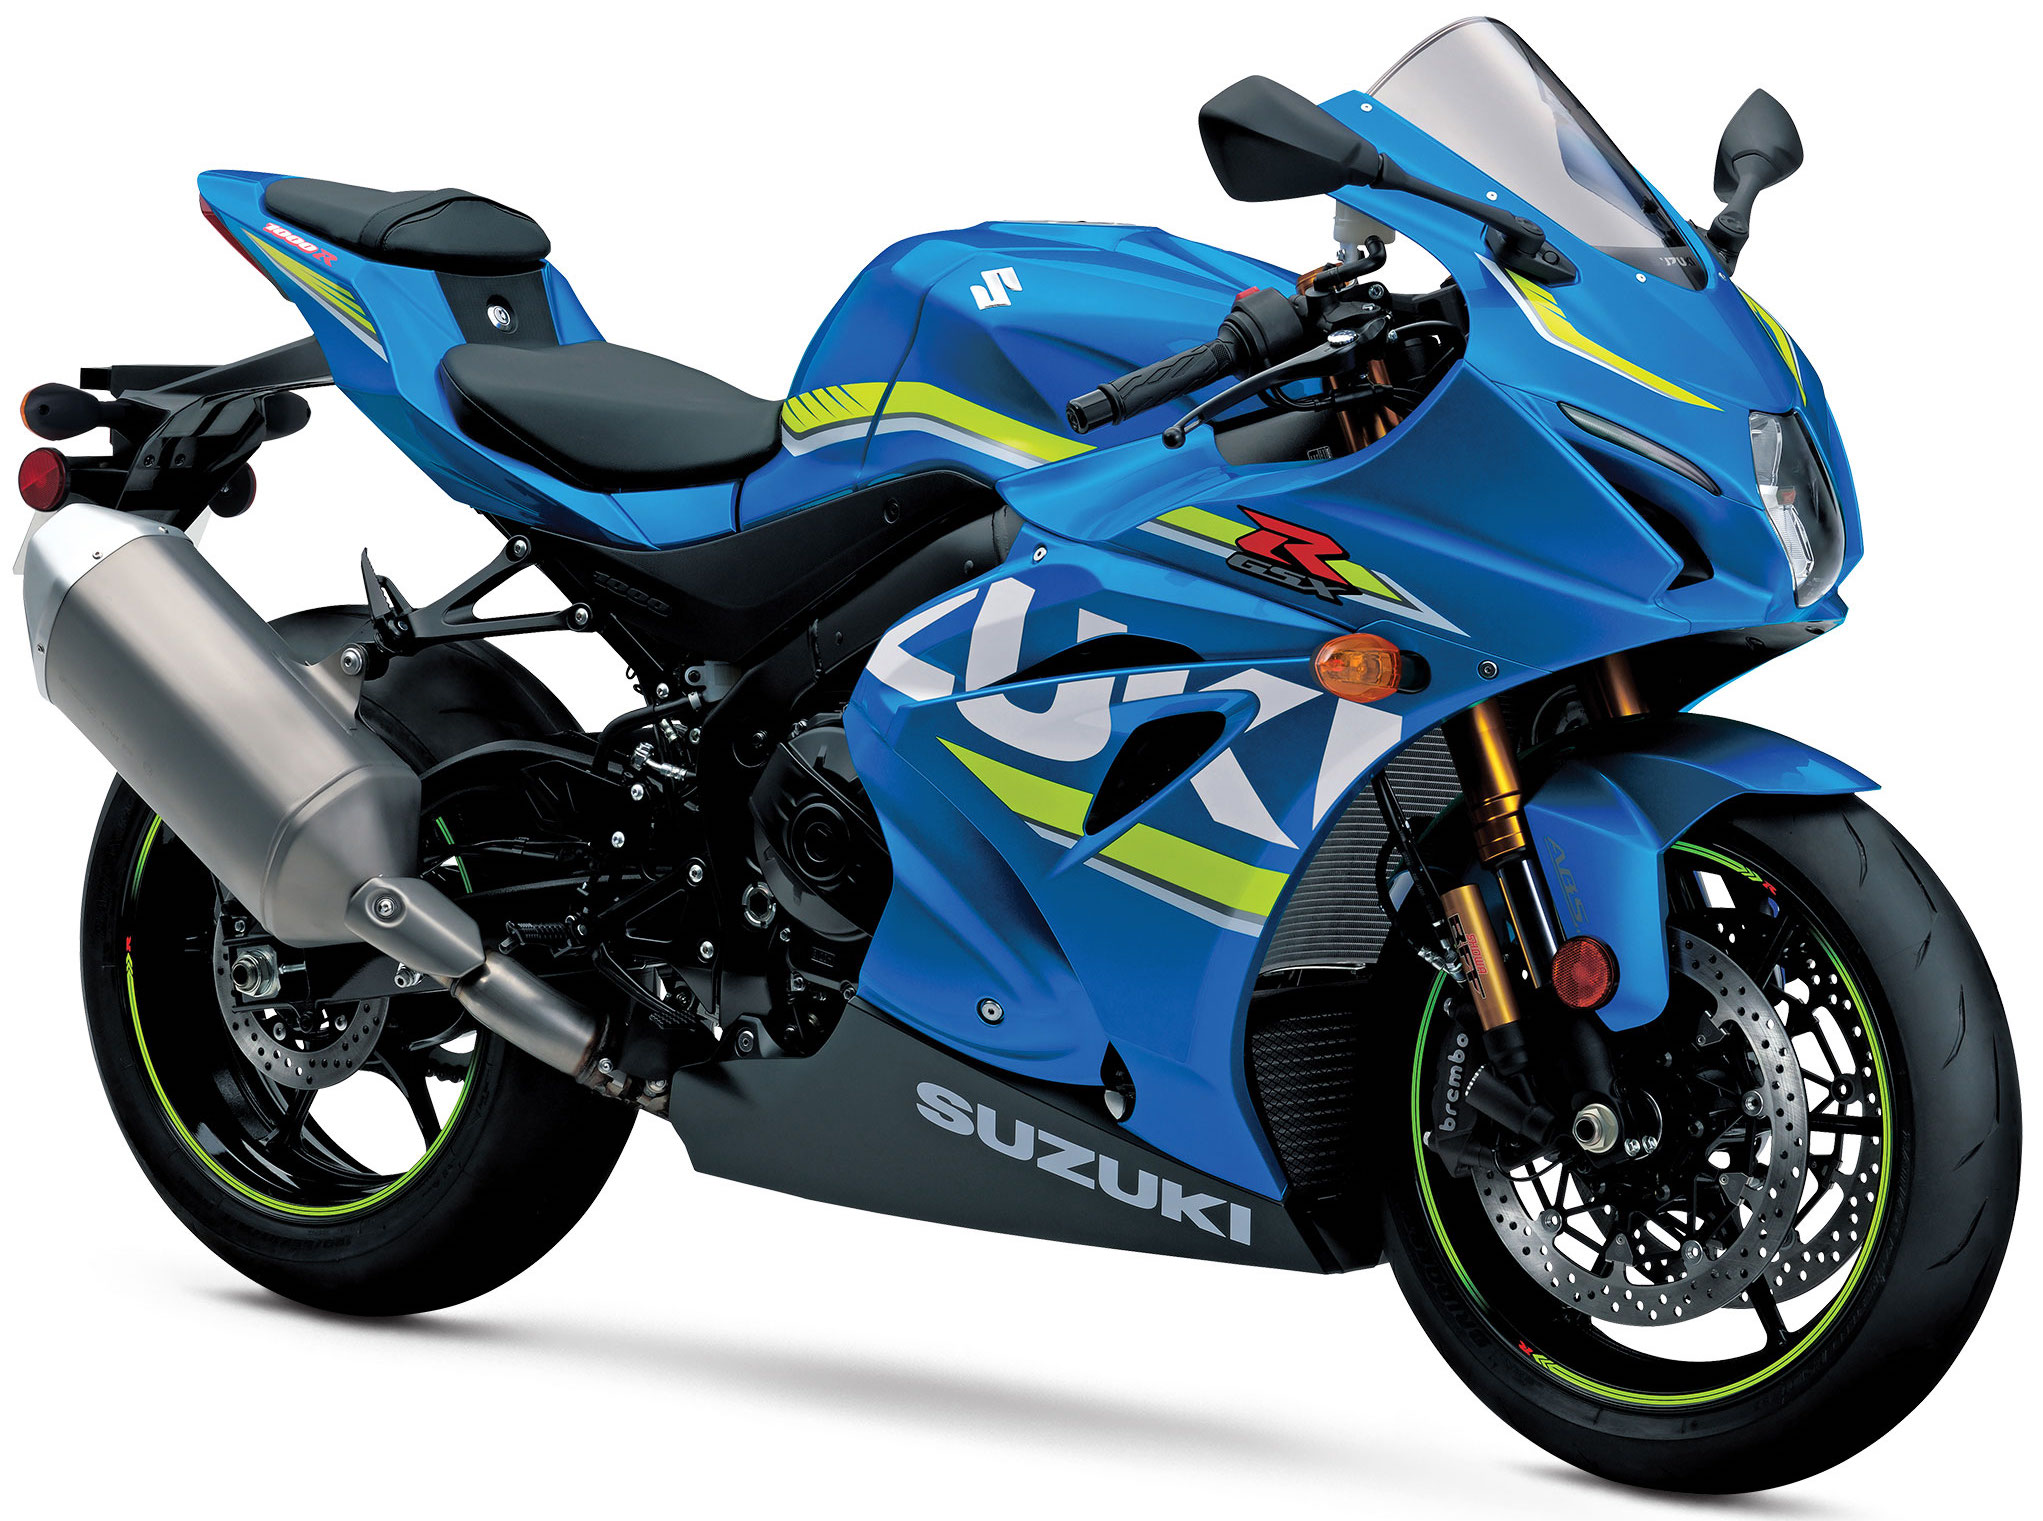 2017 Suzuki GSX-R 1000 and GSX-R 1000R L7 UK prices confirmed – from ...